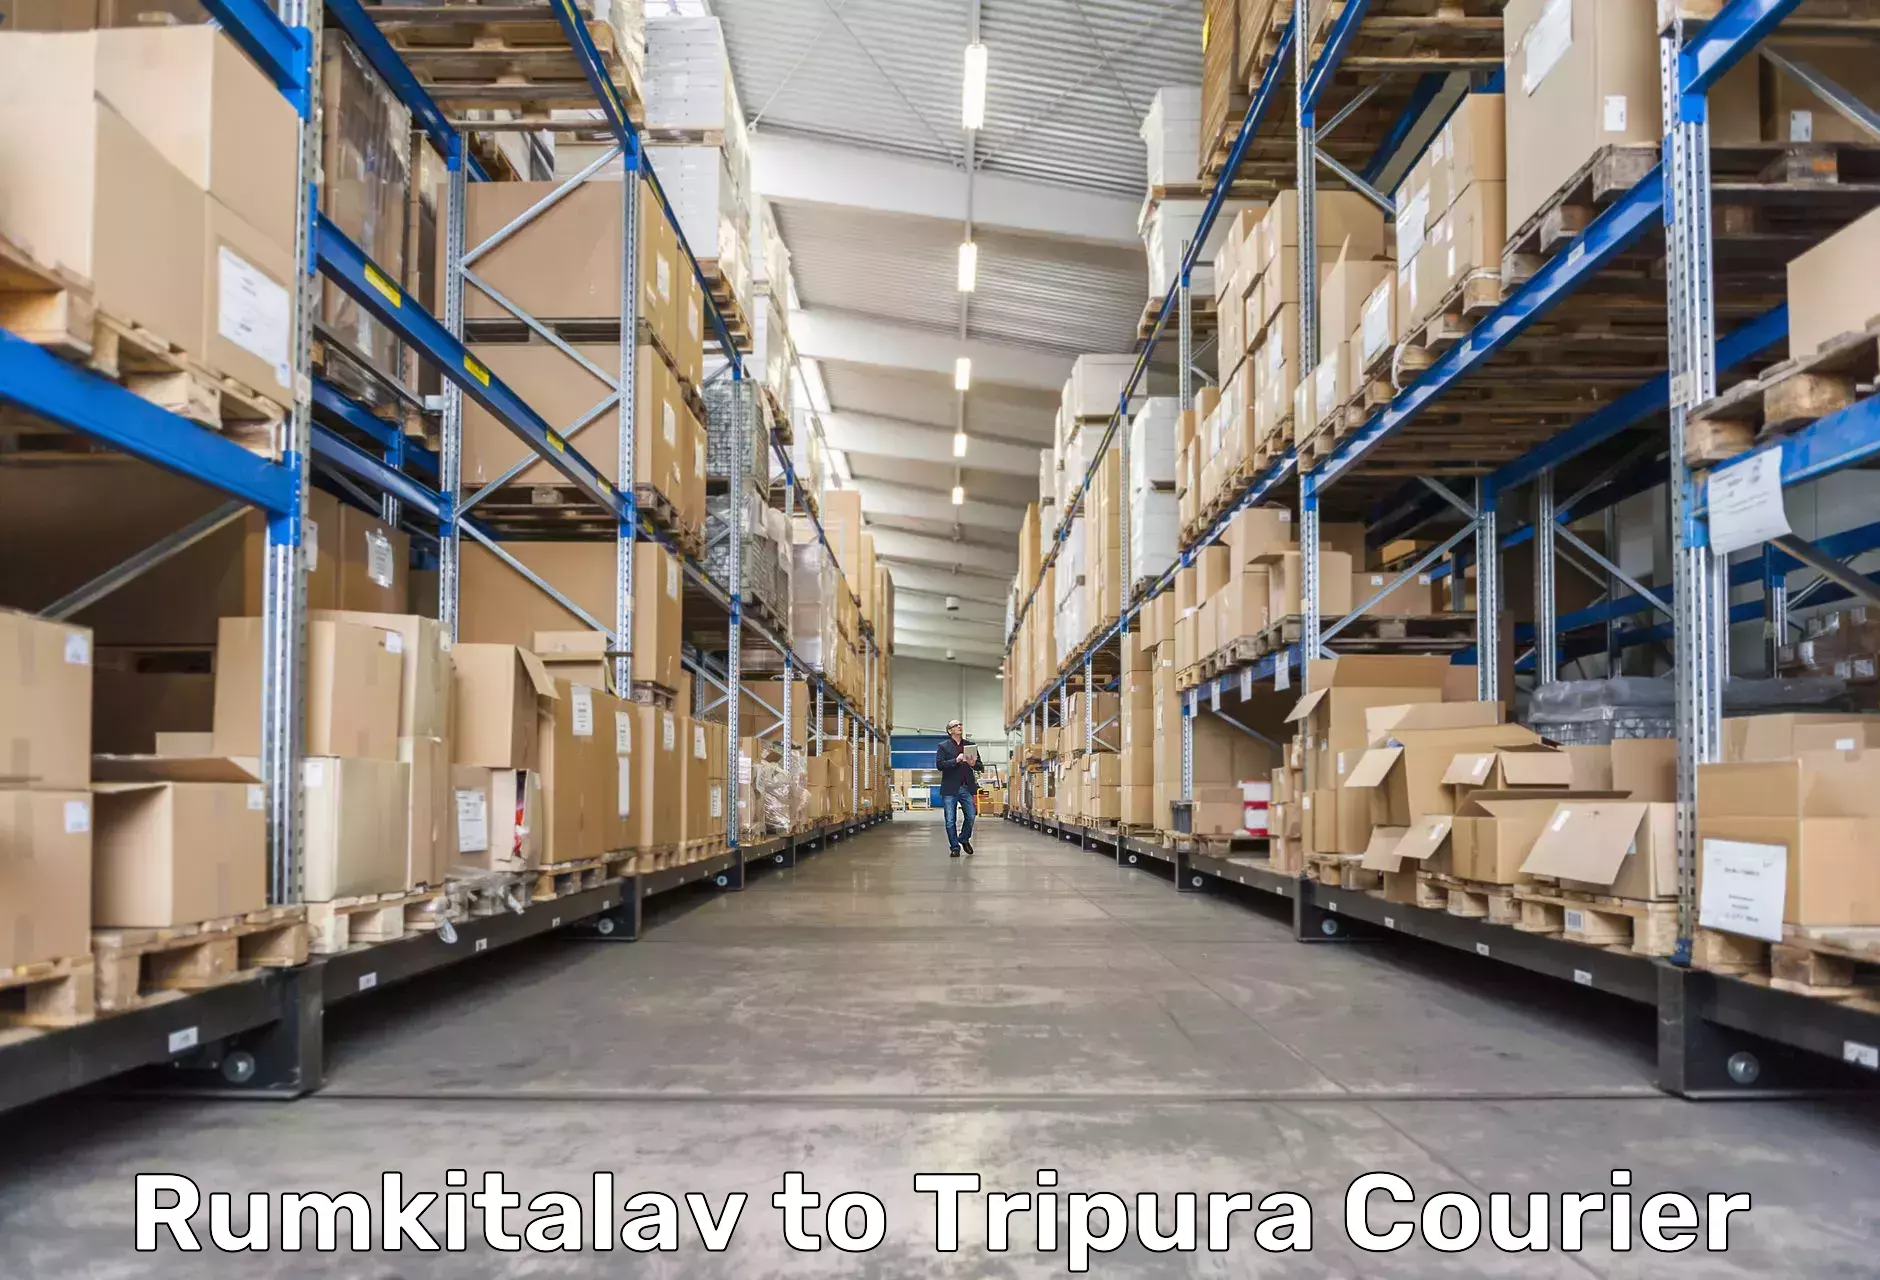 Reliable courier services Rumkitalav to Udaipur Tripura